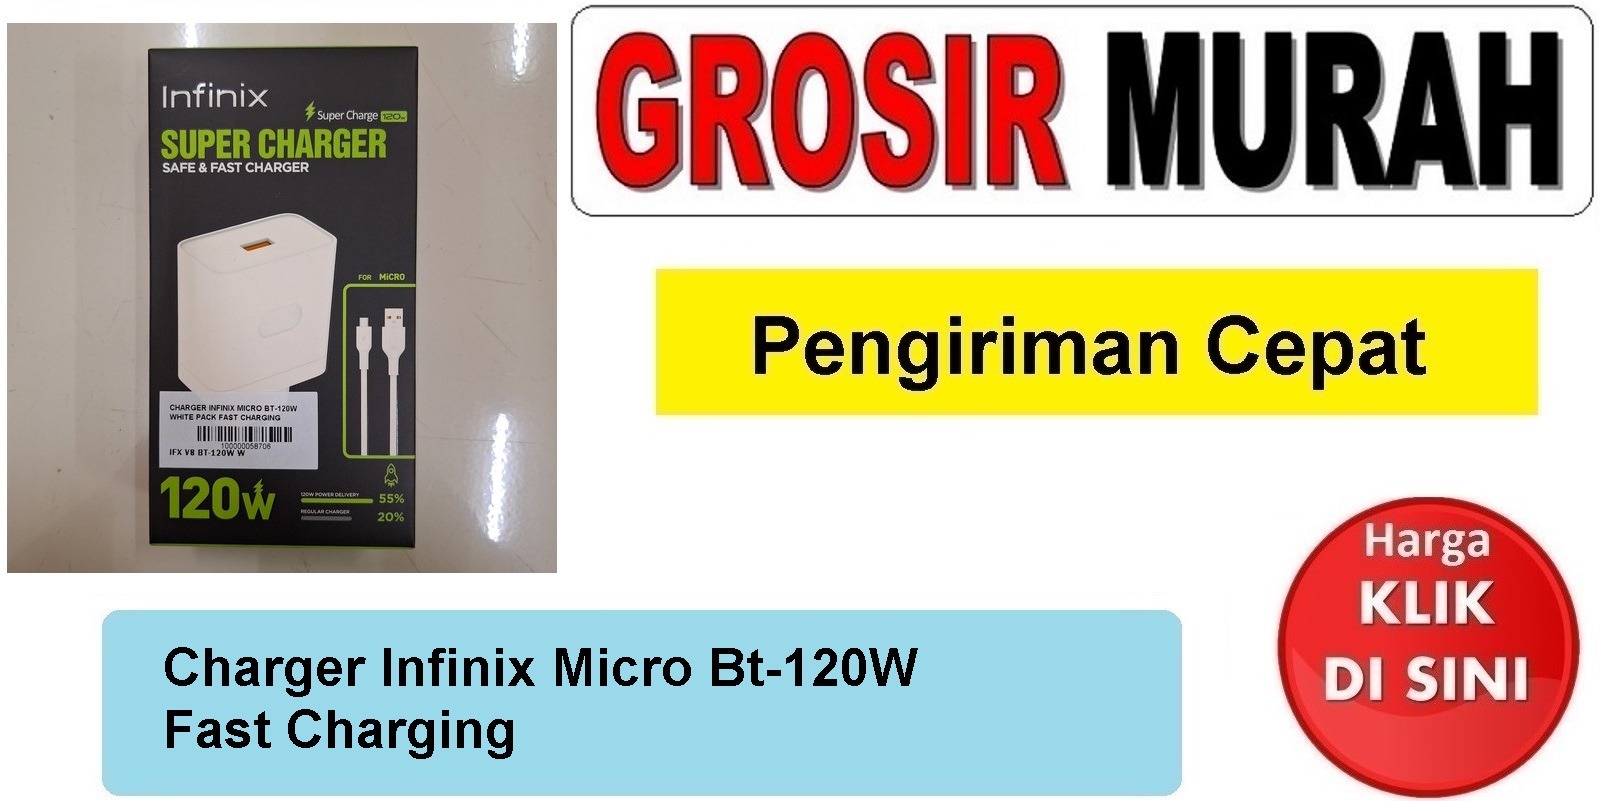 Charger Infinix Micro Bt-120W Fast Charging